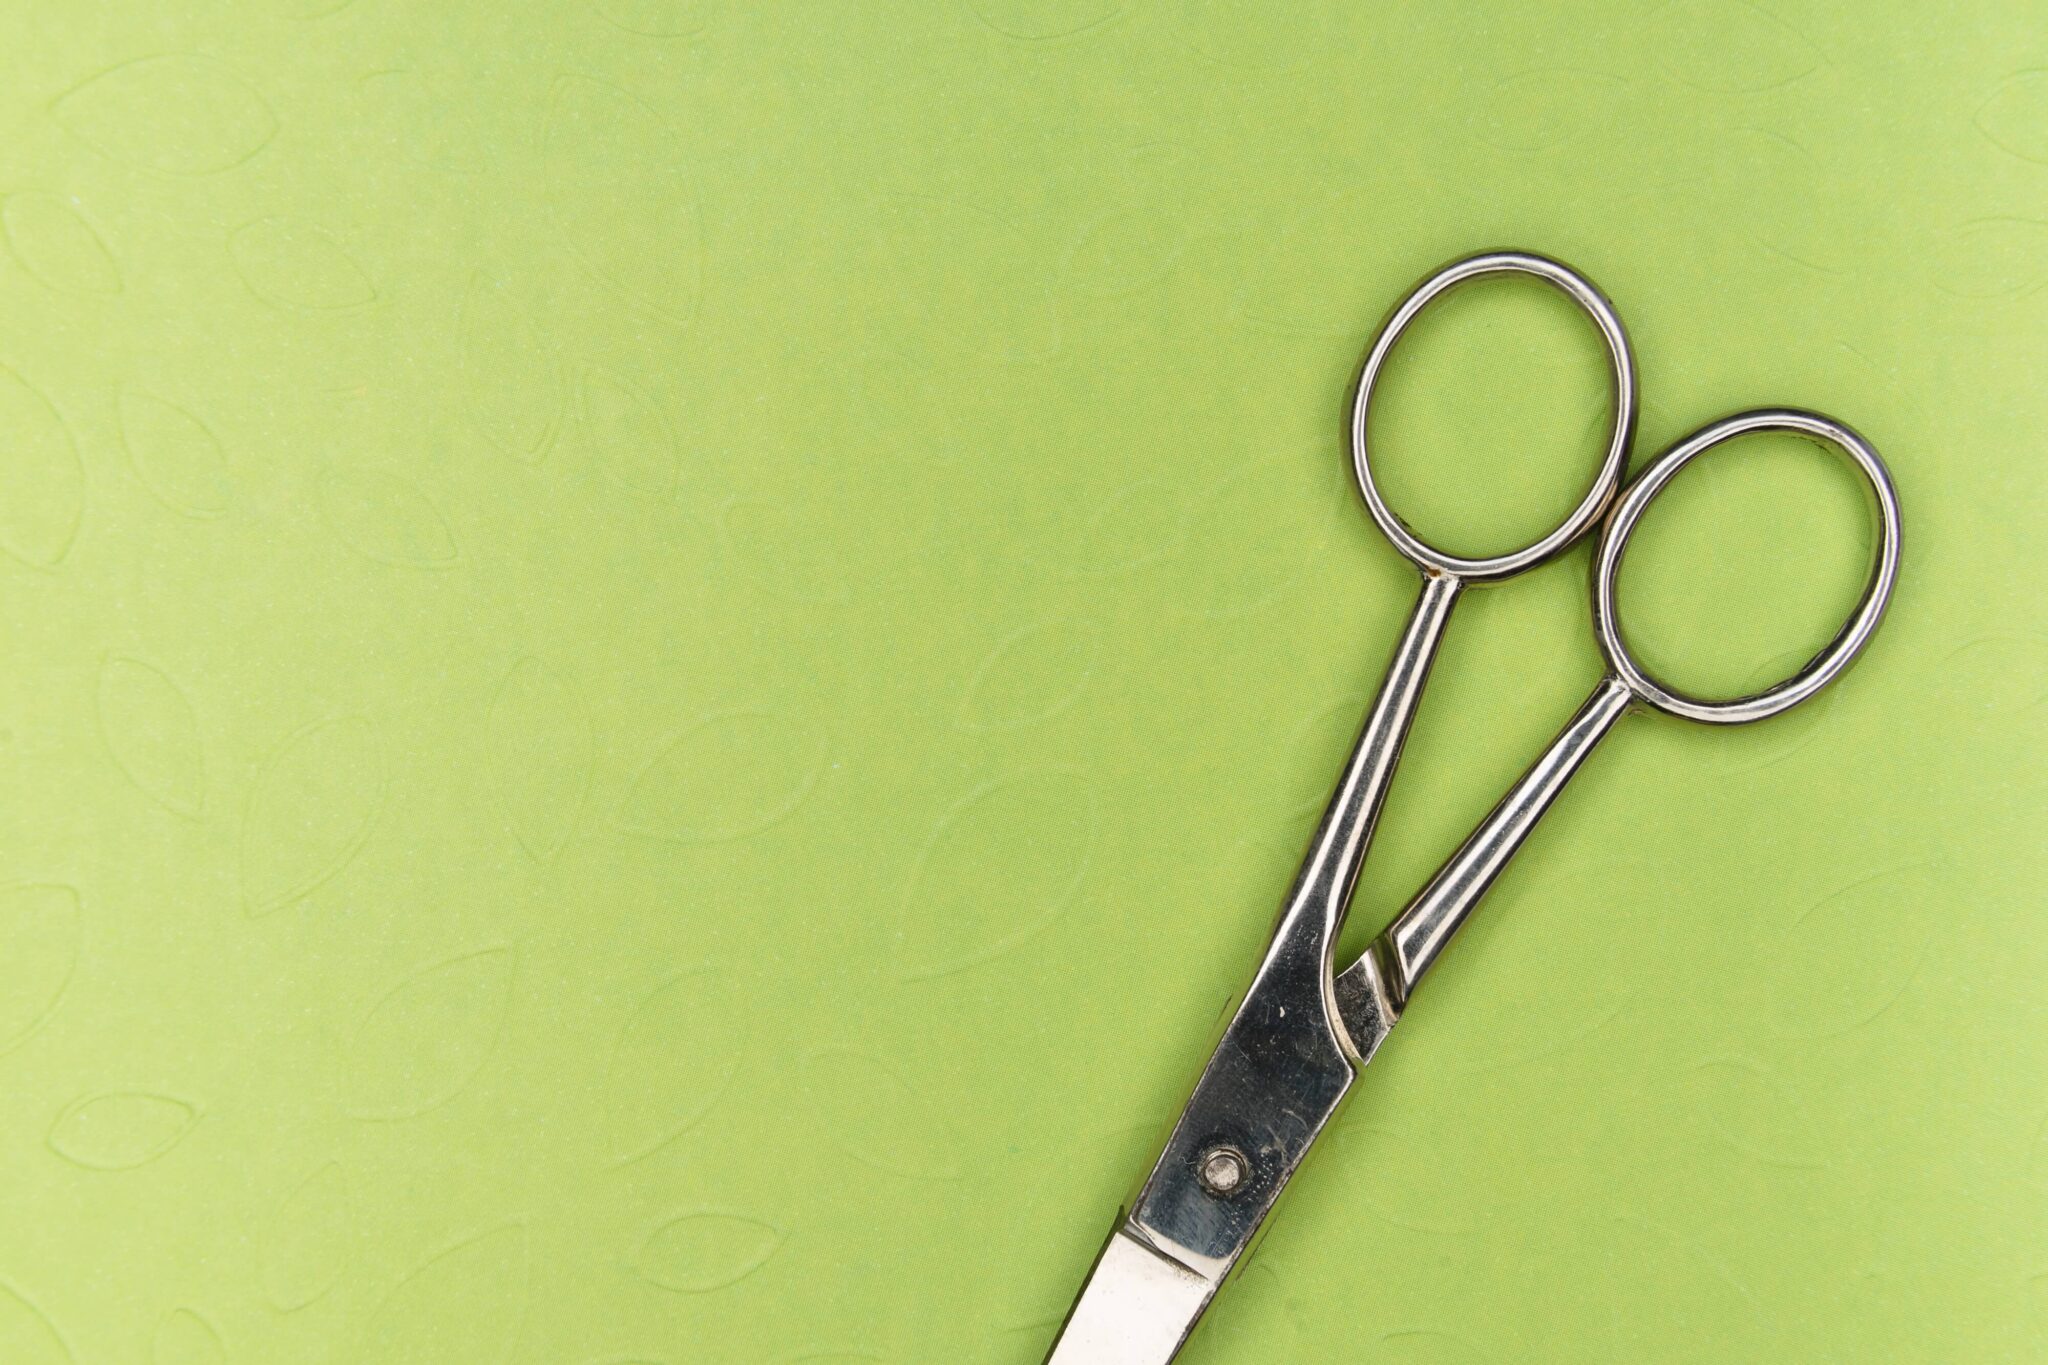 A pair of silver scissors with a green background.